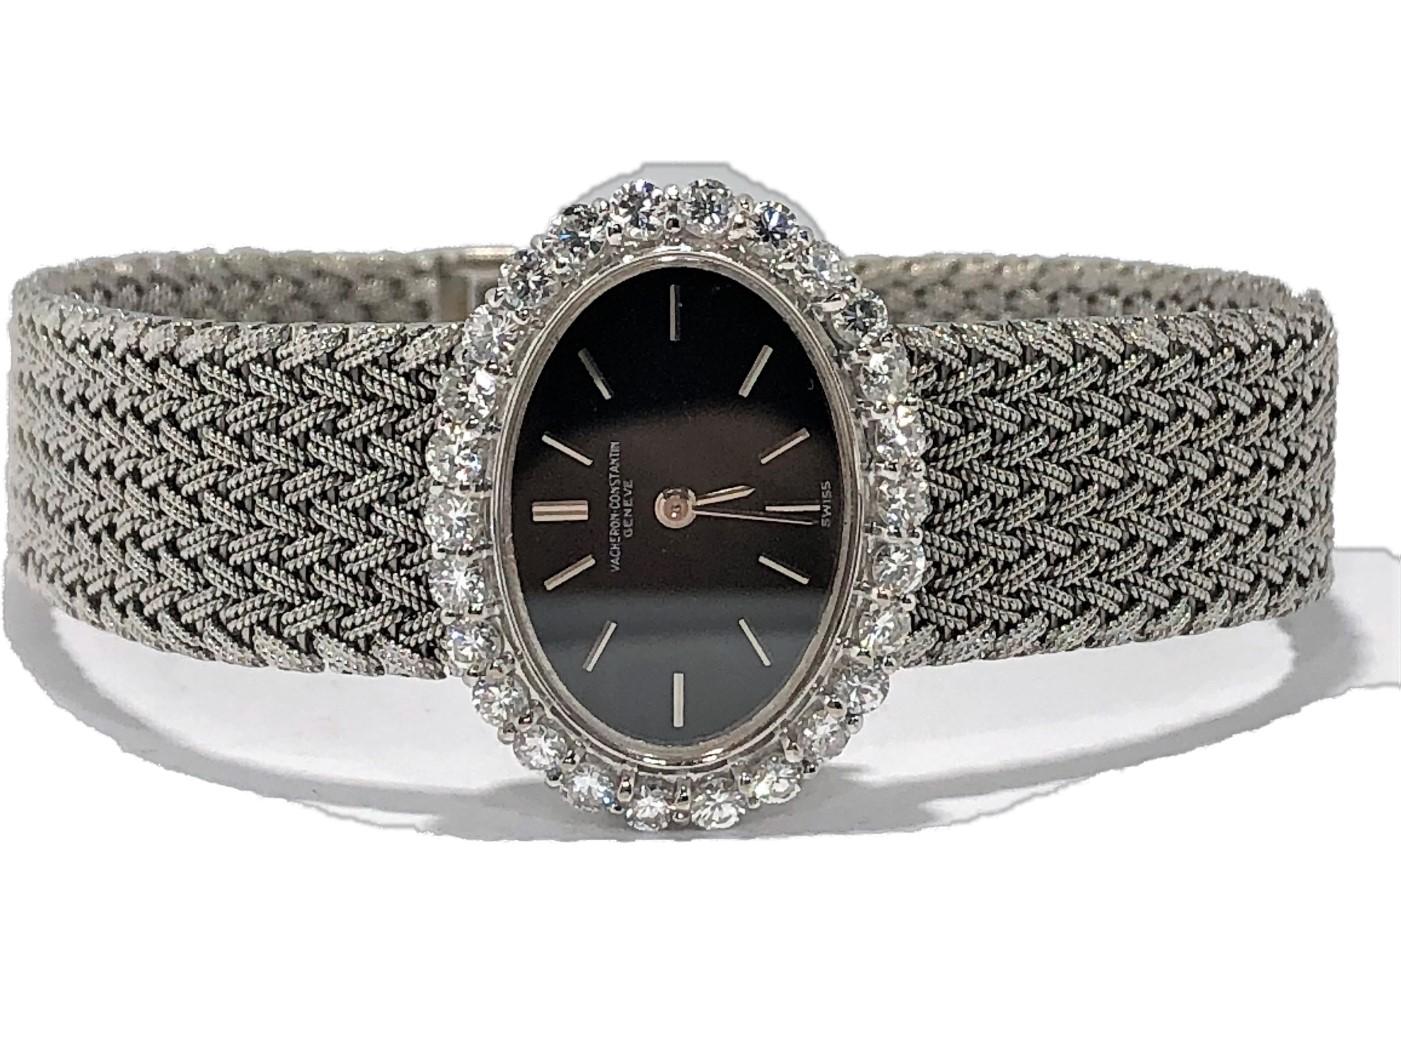 Classic in design, this tailored, 18K White Gold  ladies mid-size 
Vacheron Constantin watch has a horizontal, oval shaped black dial 
accented by crisp white gold markers, surrounded by a bezel of 
scintillating round diamonds. The bezel weighs an